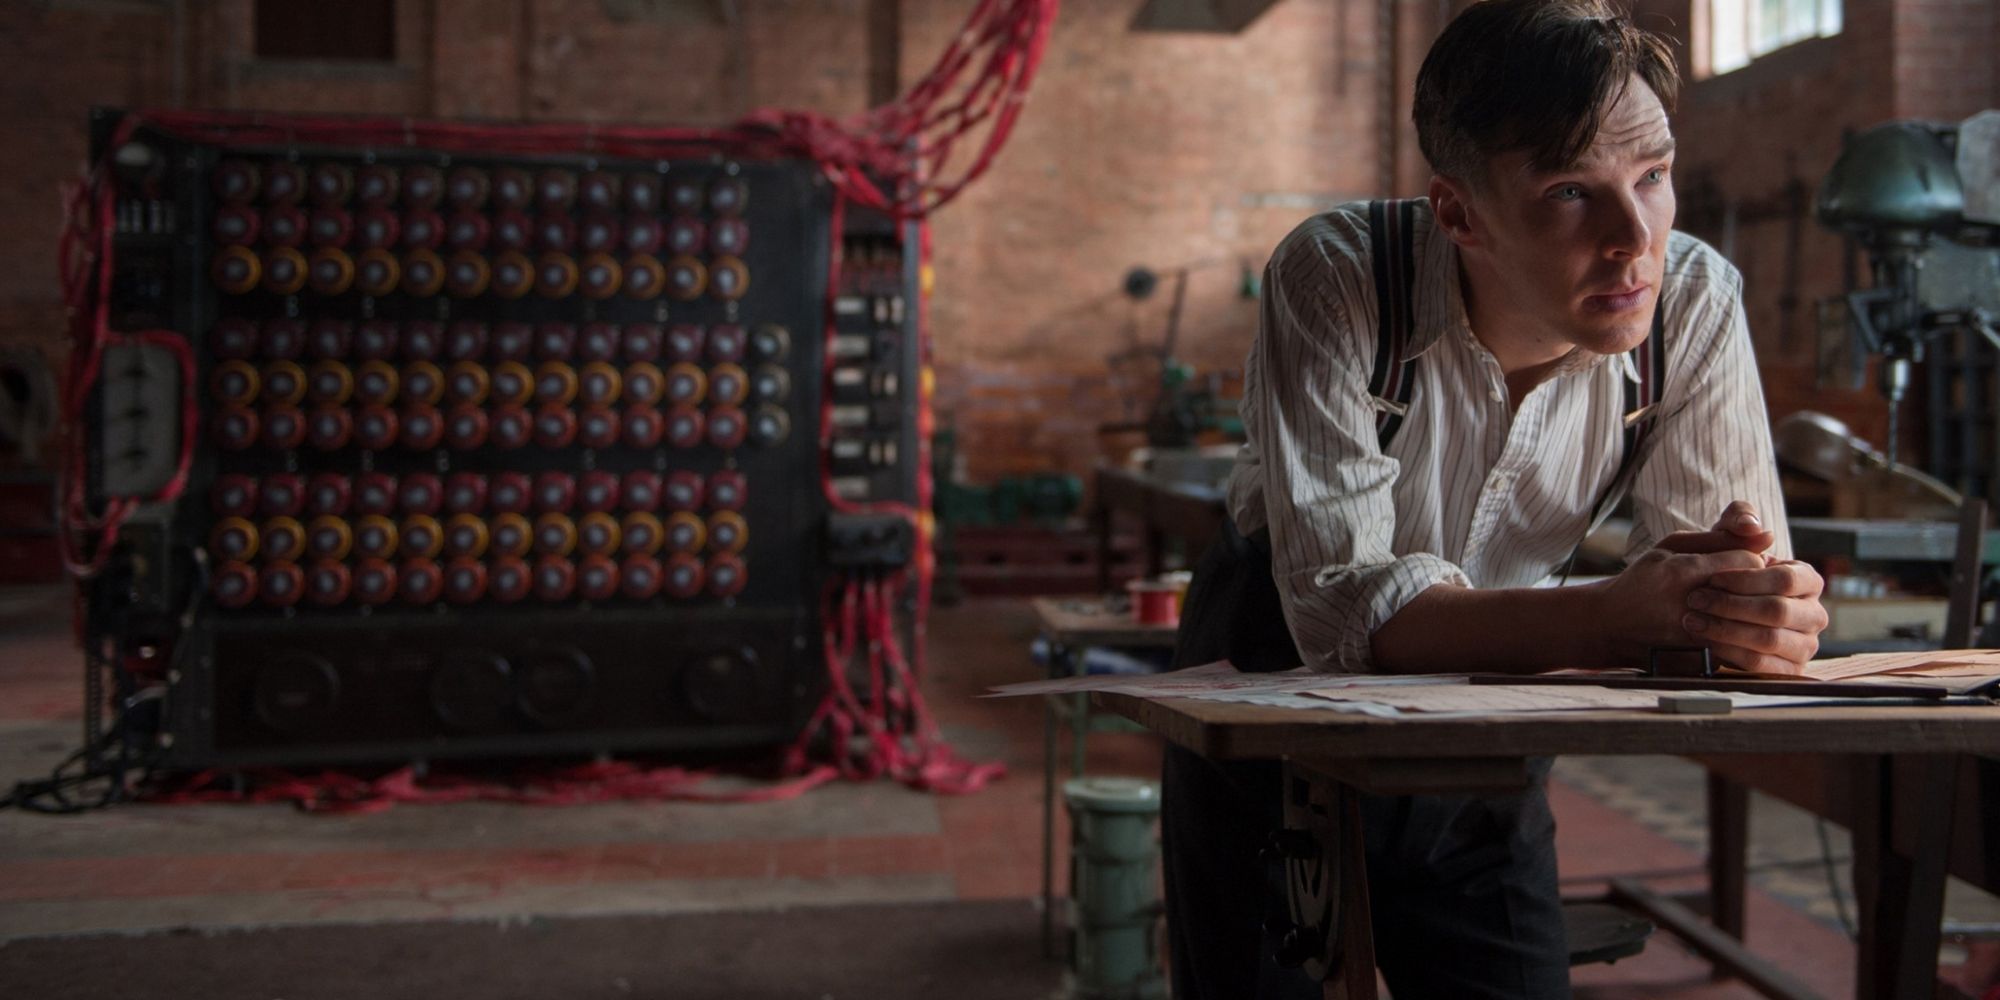 Benedict Cumberbatch as Alan Turing leaning on a table with his codebreaking machine in the background